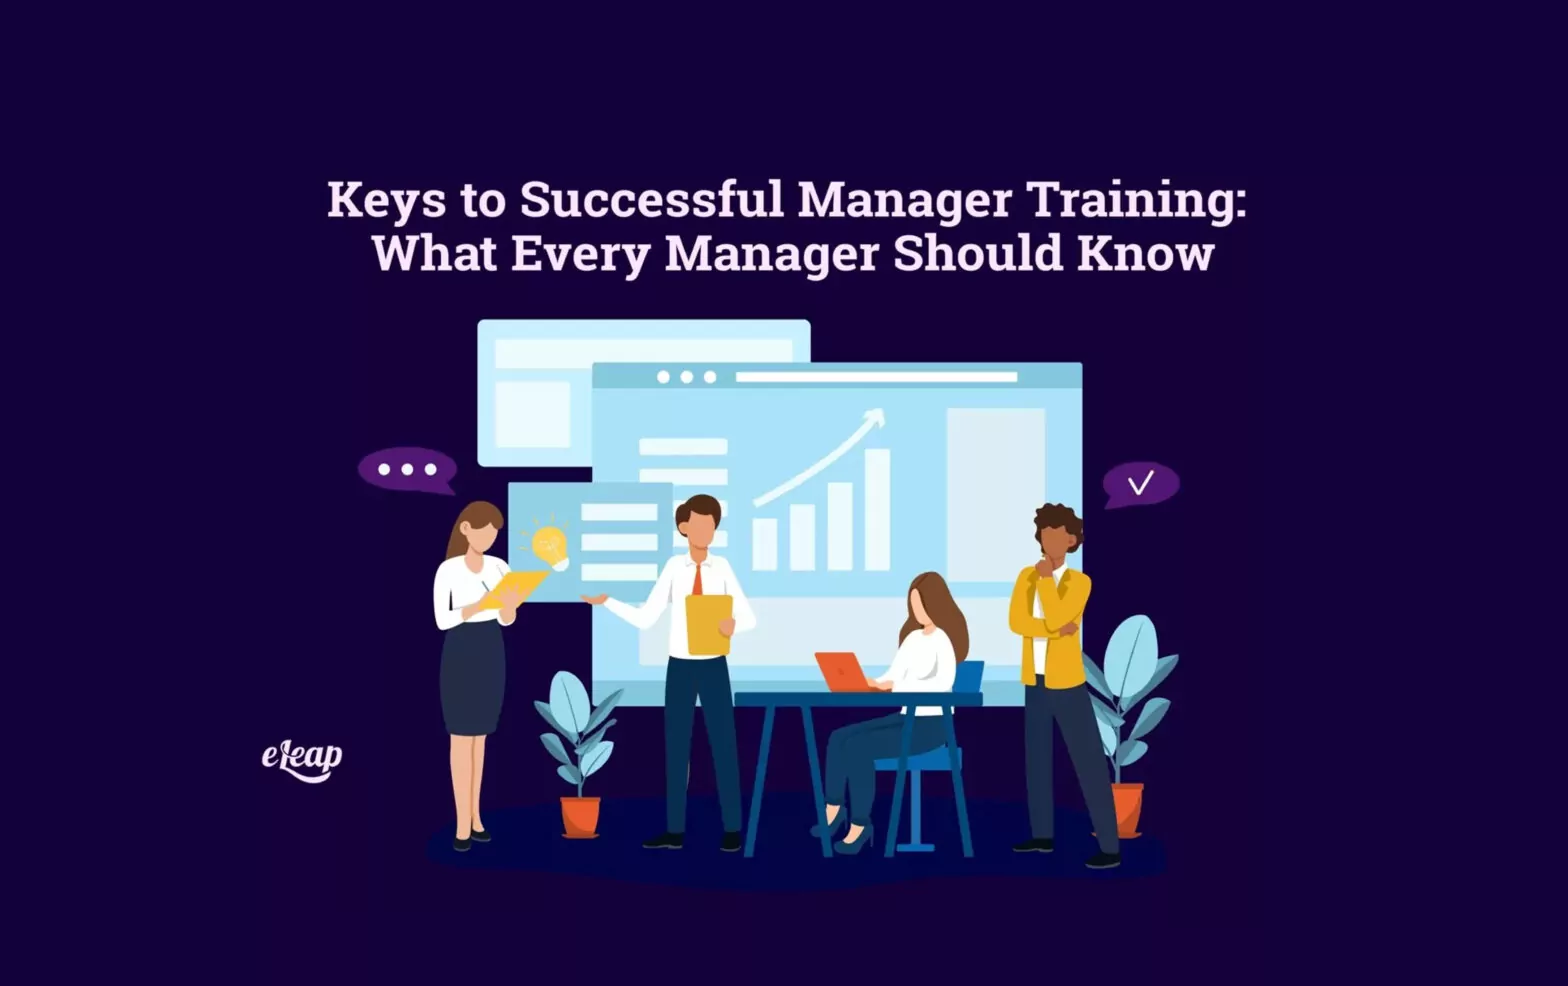 Keys to Successful Manager Training: What Every Manager Should Know